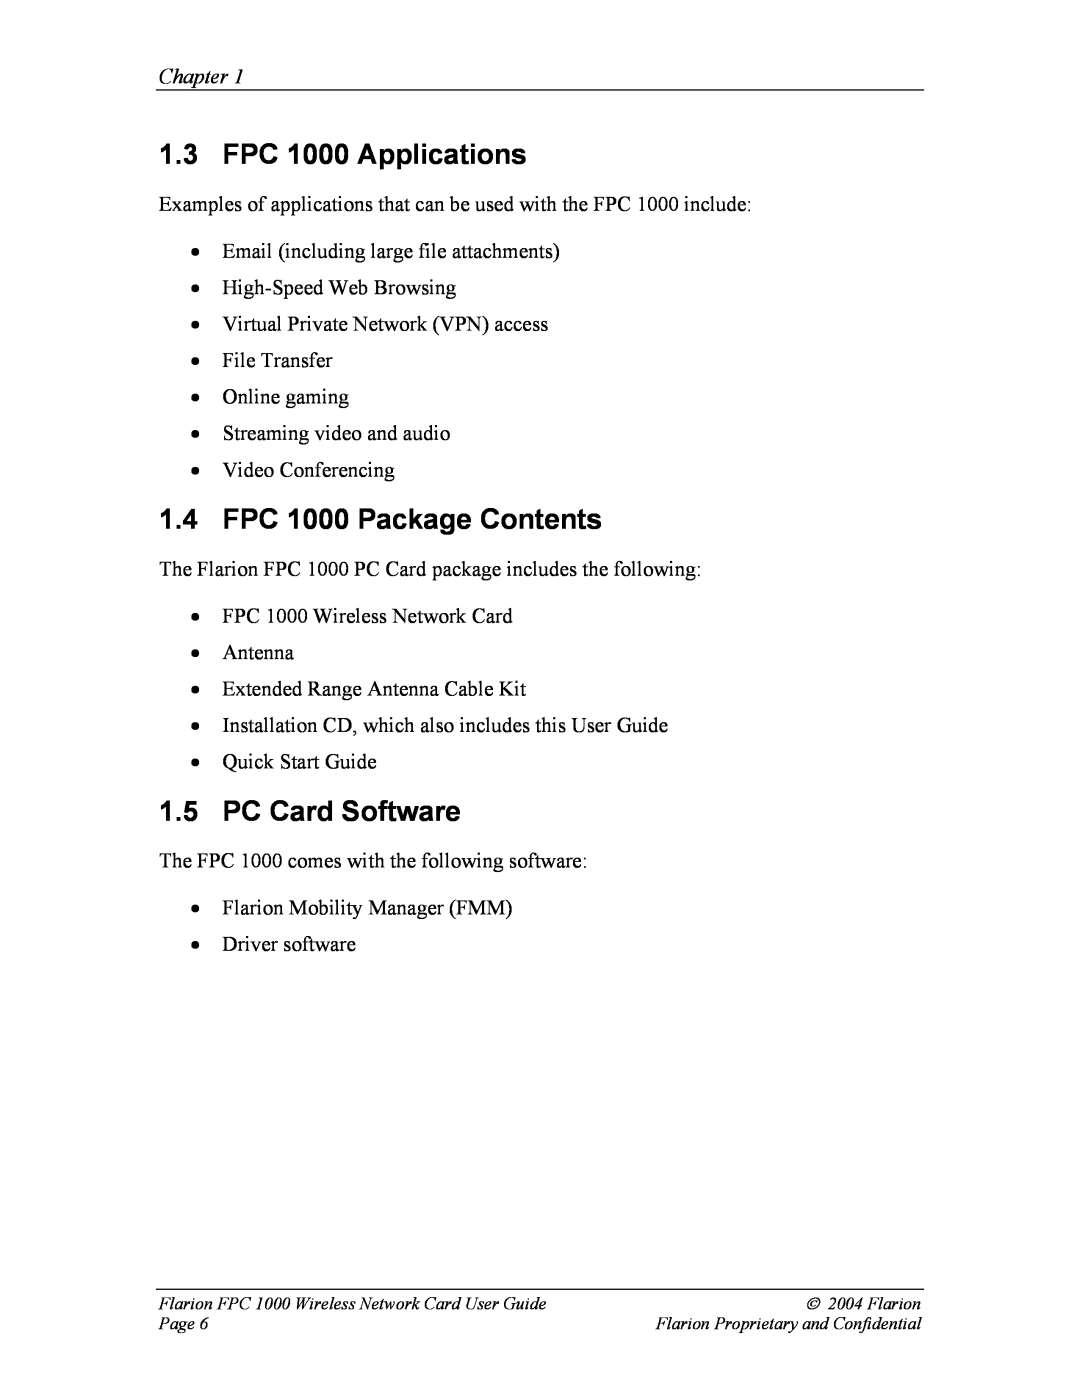 GE manual FPC 1000 Applications, FPC 1000 Package Contents, PC Card Software, Chapter 